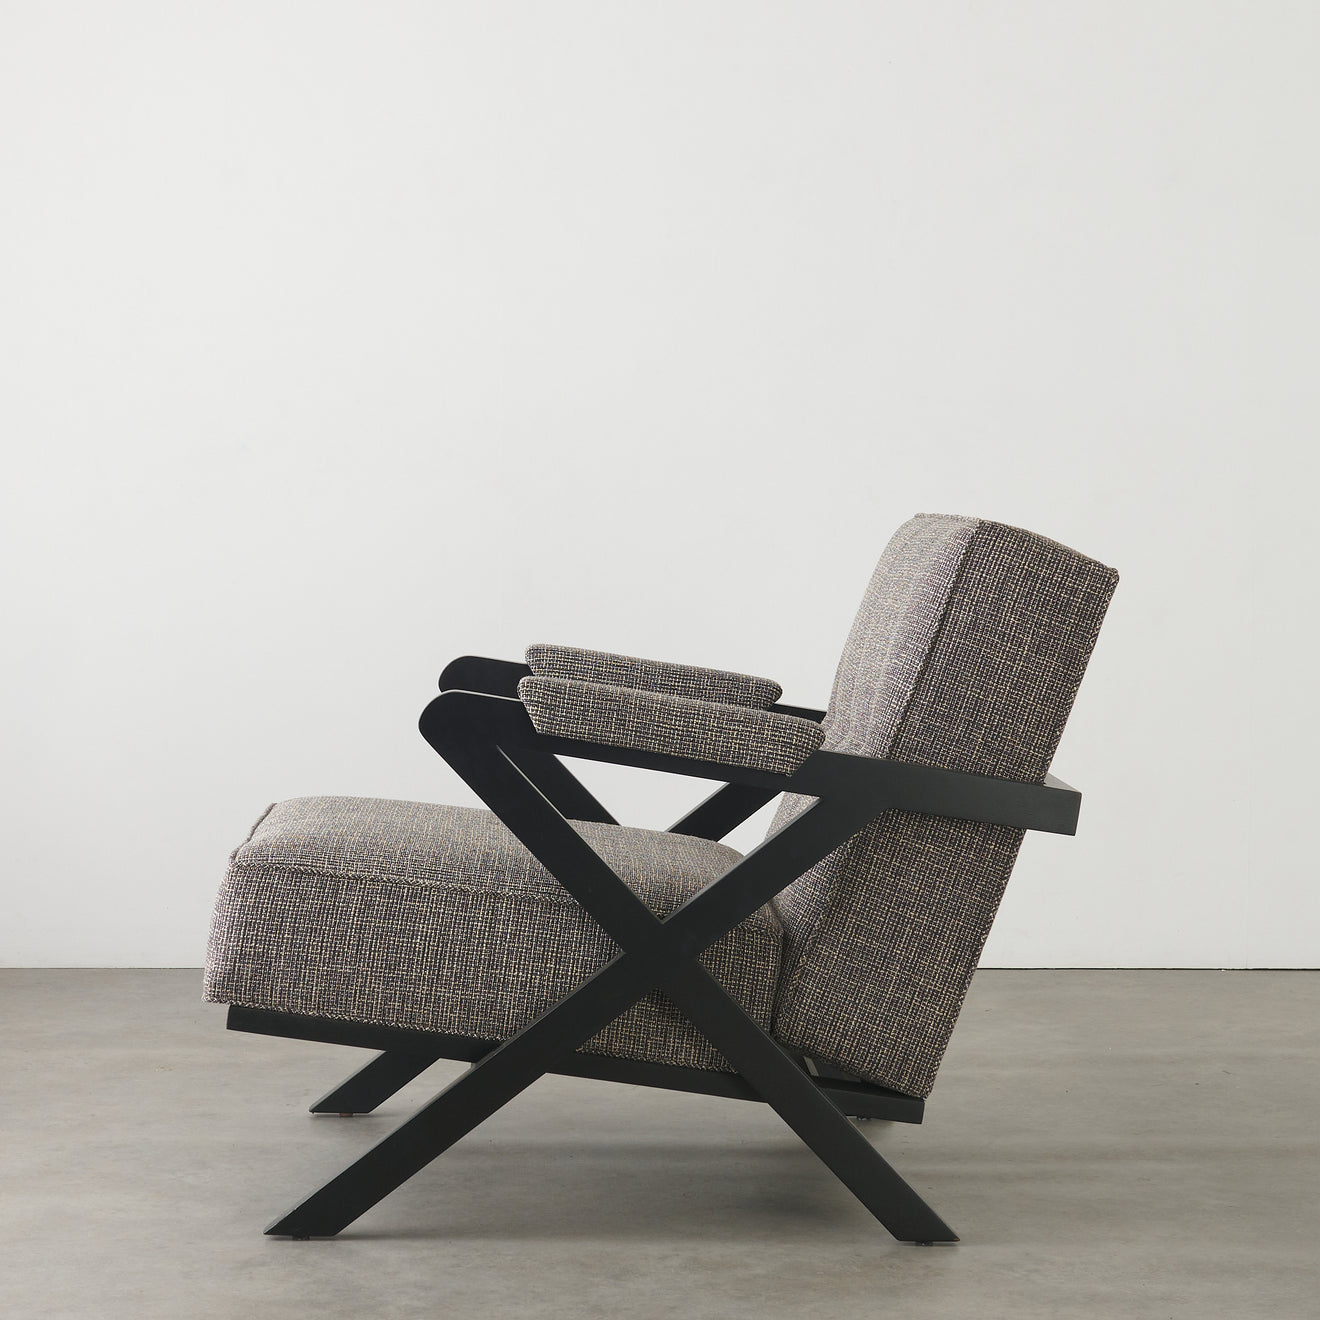 PAIR OF LASZLO LOUNGE CHAIRS, BROWN AND SALTMAN